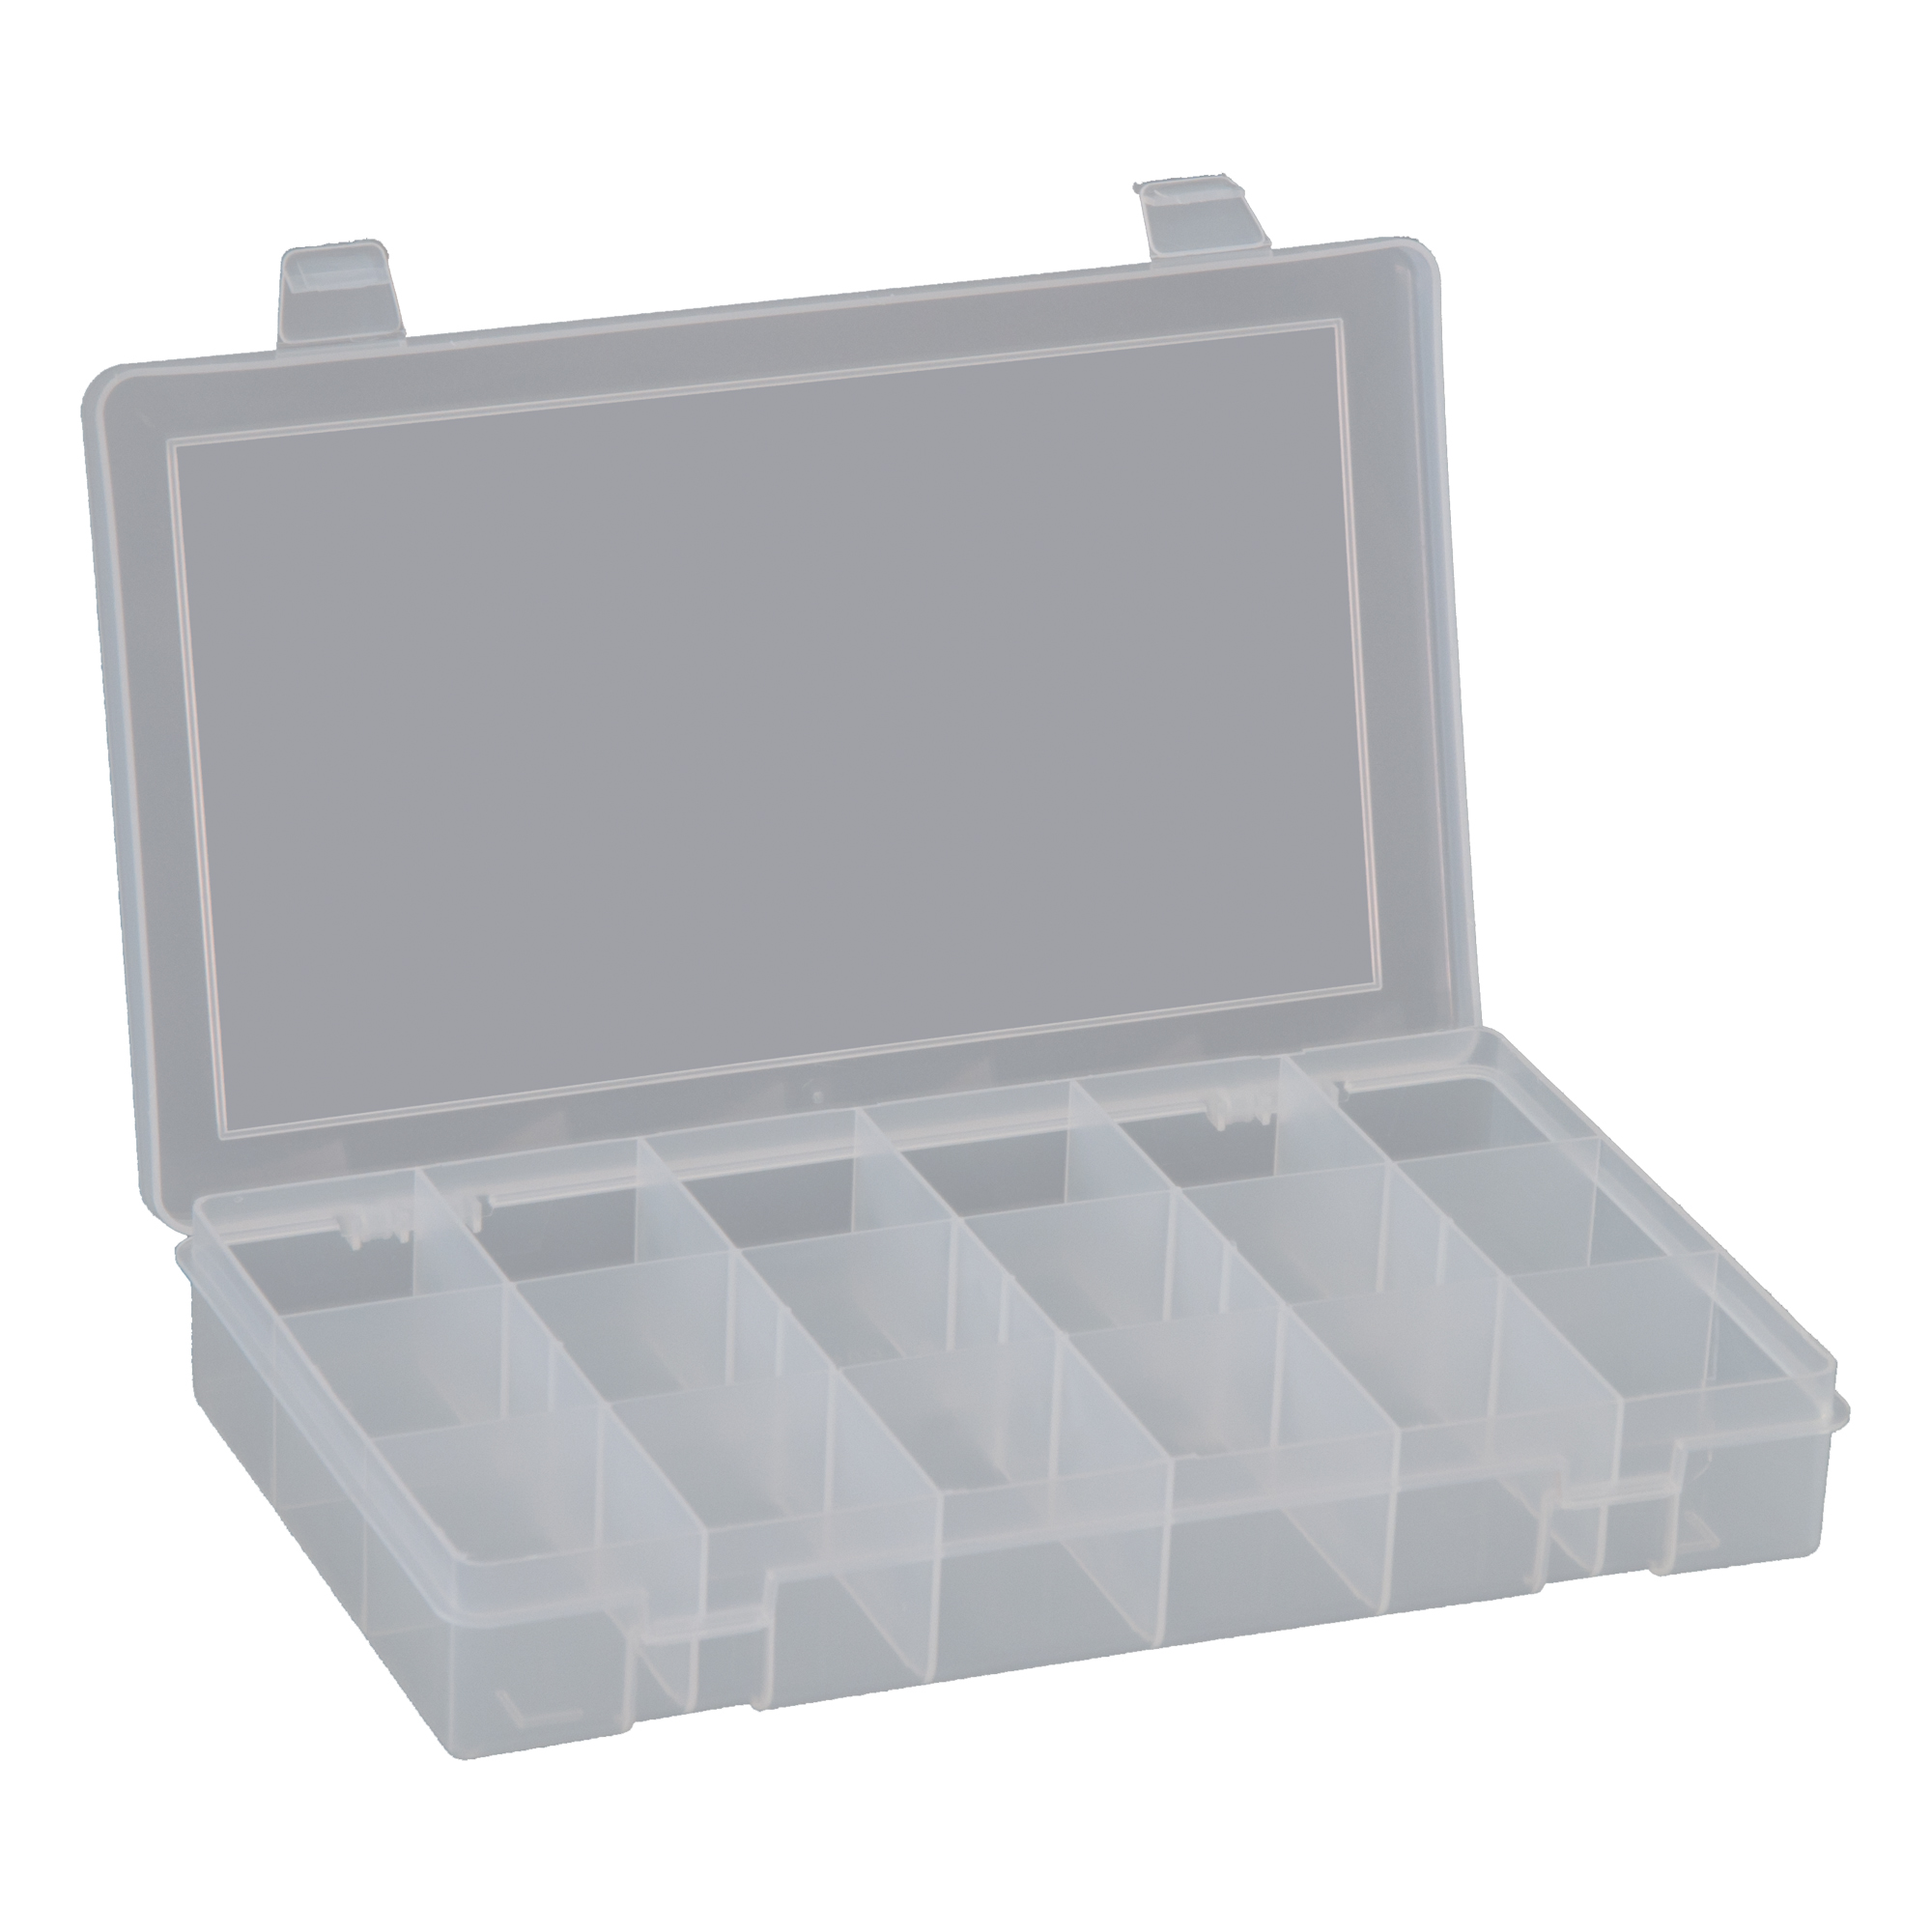 DURHAM MFG 117-95-RSC-IND Compartment Box for Small Parts Storage Individual 